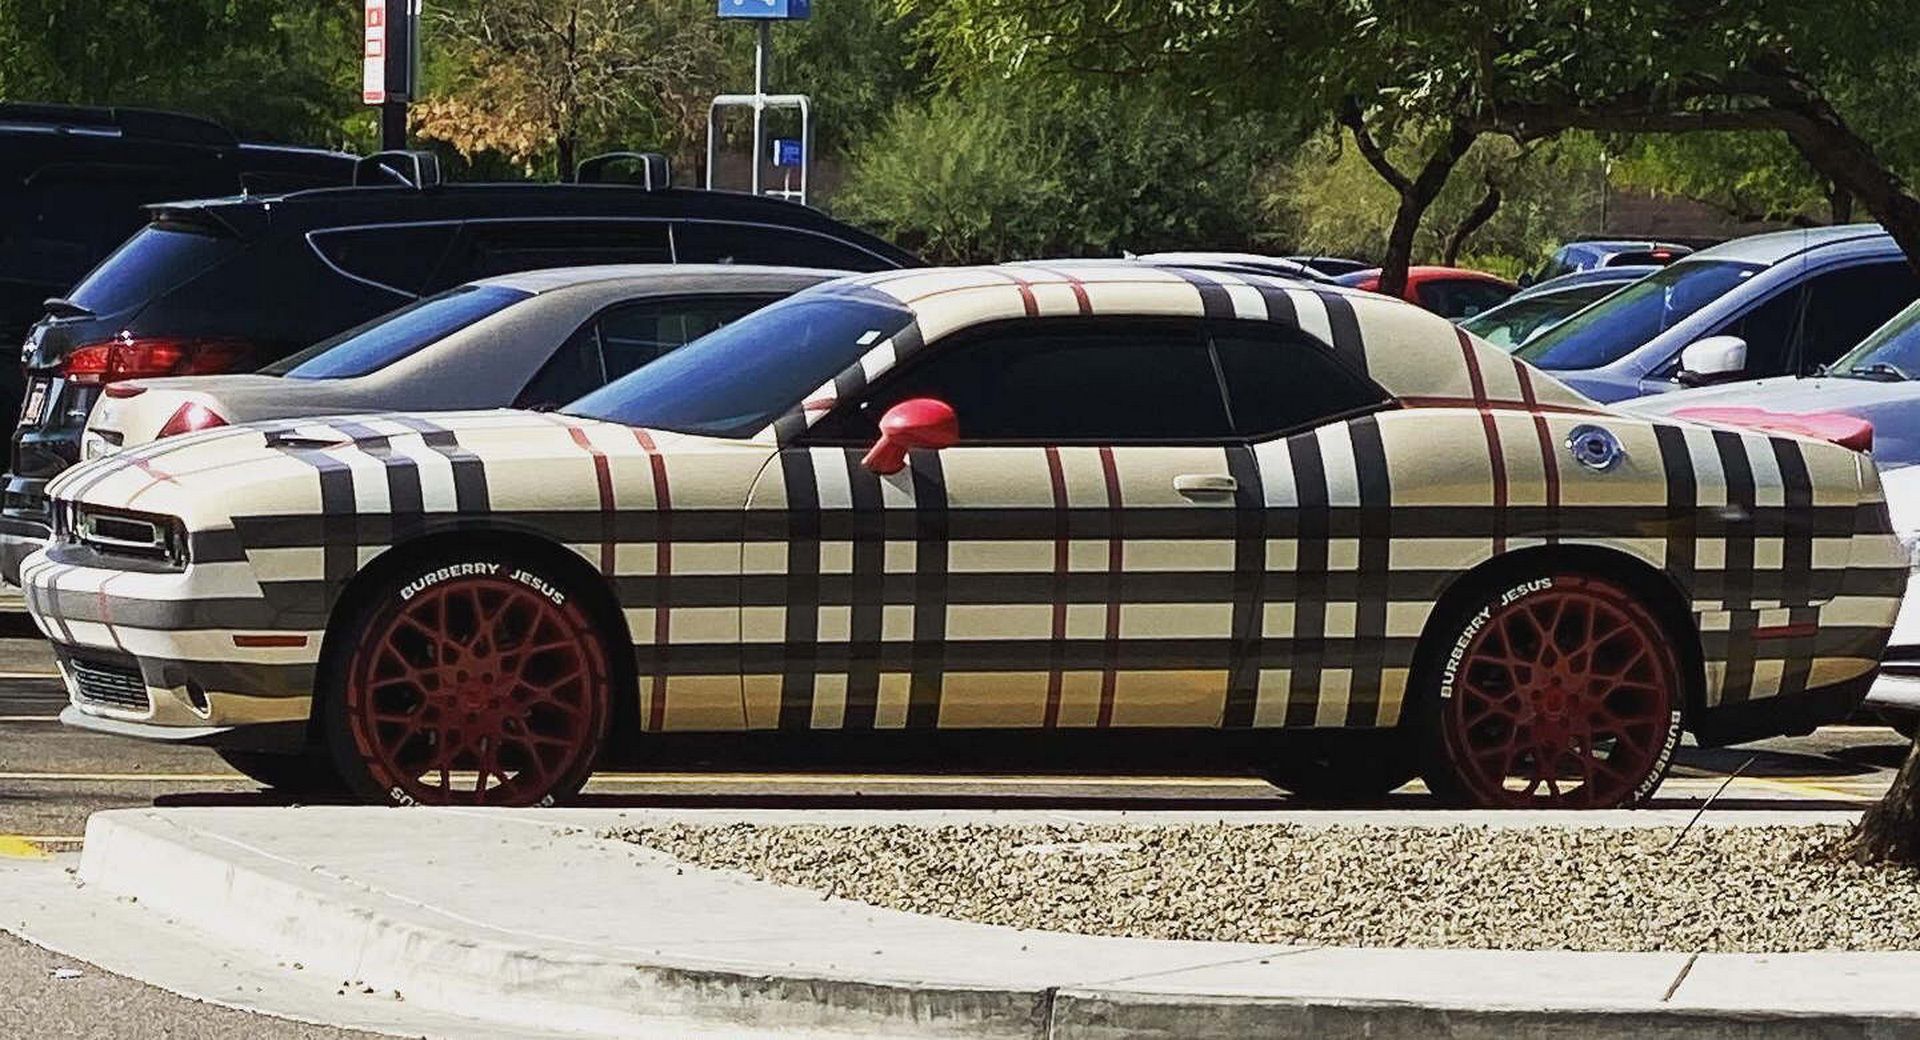 Dodge Challenger ugly burberry wrap aprked